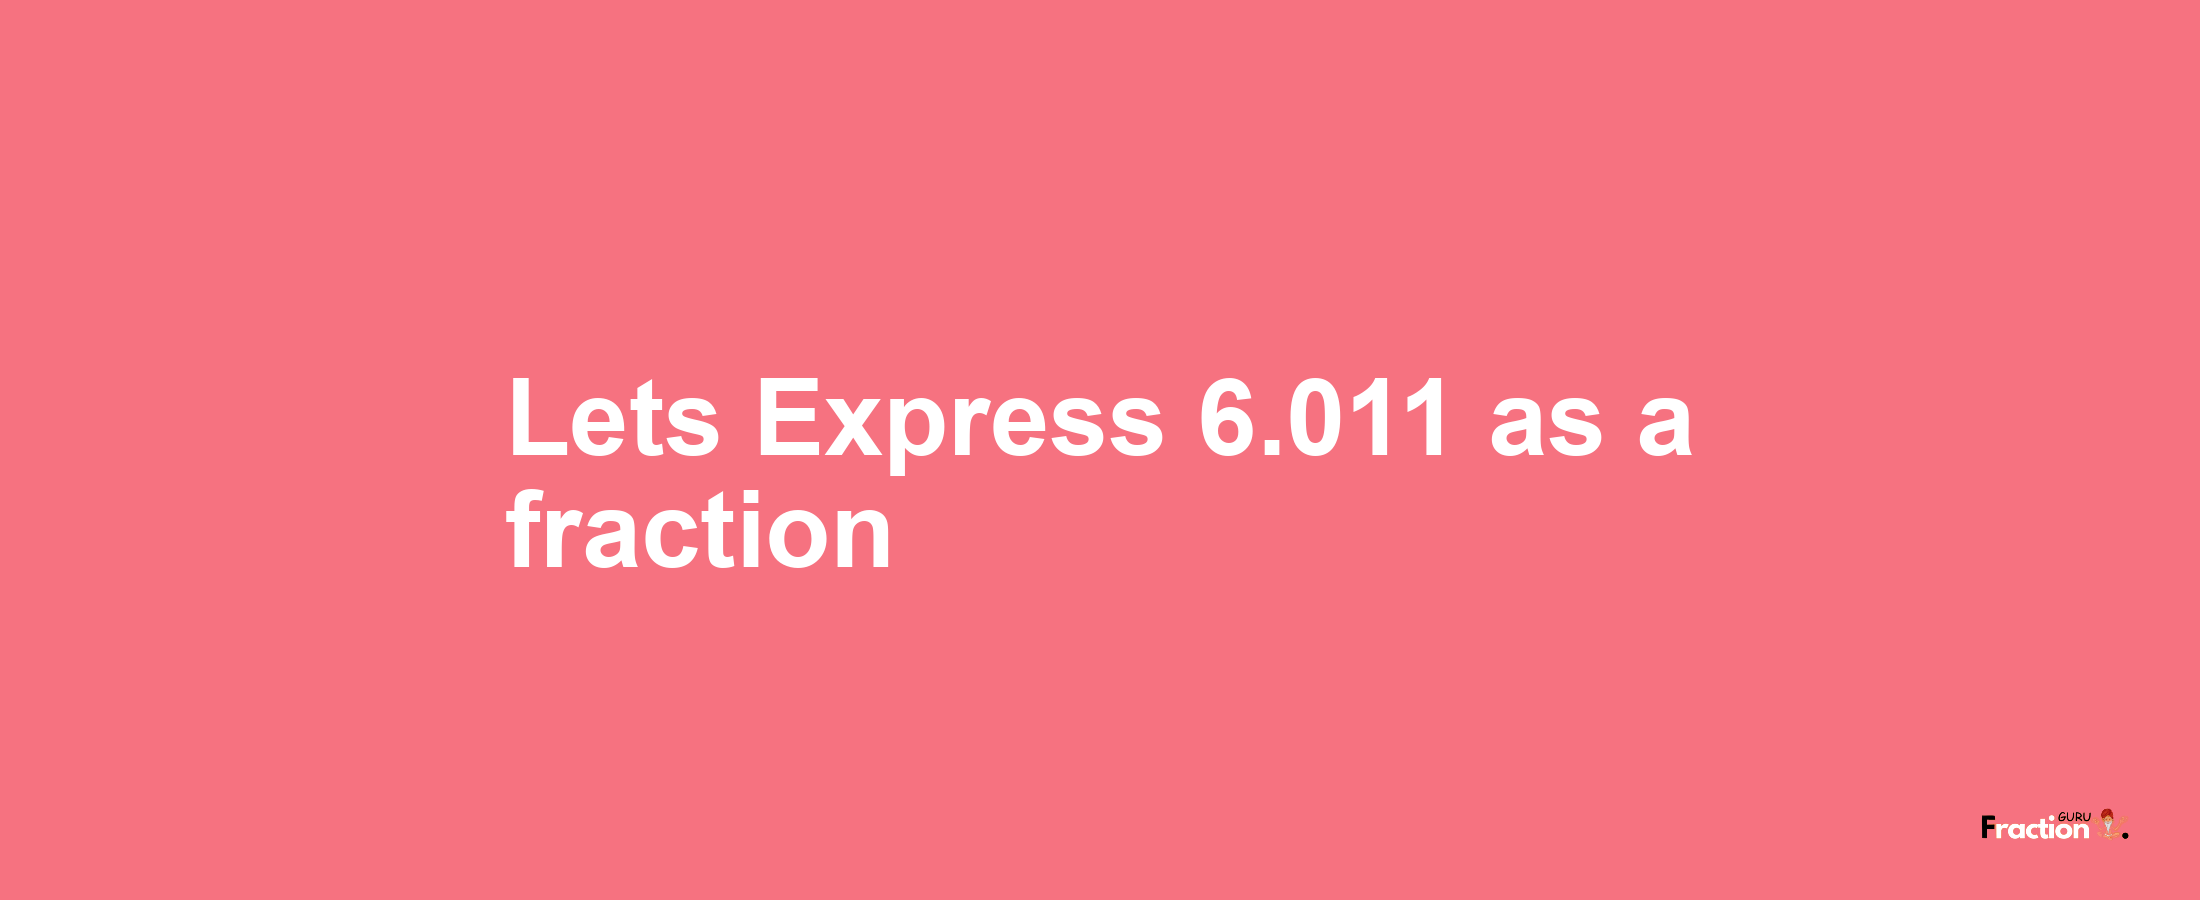 Lets Express 6.011 as afraction